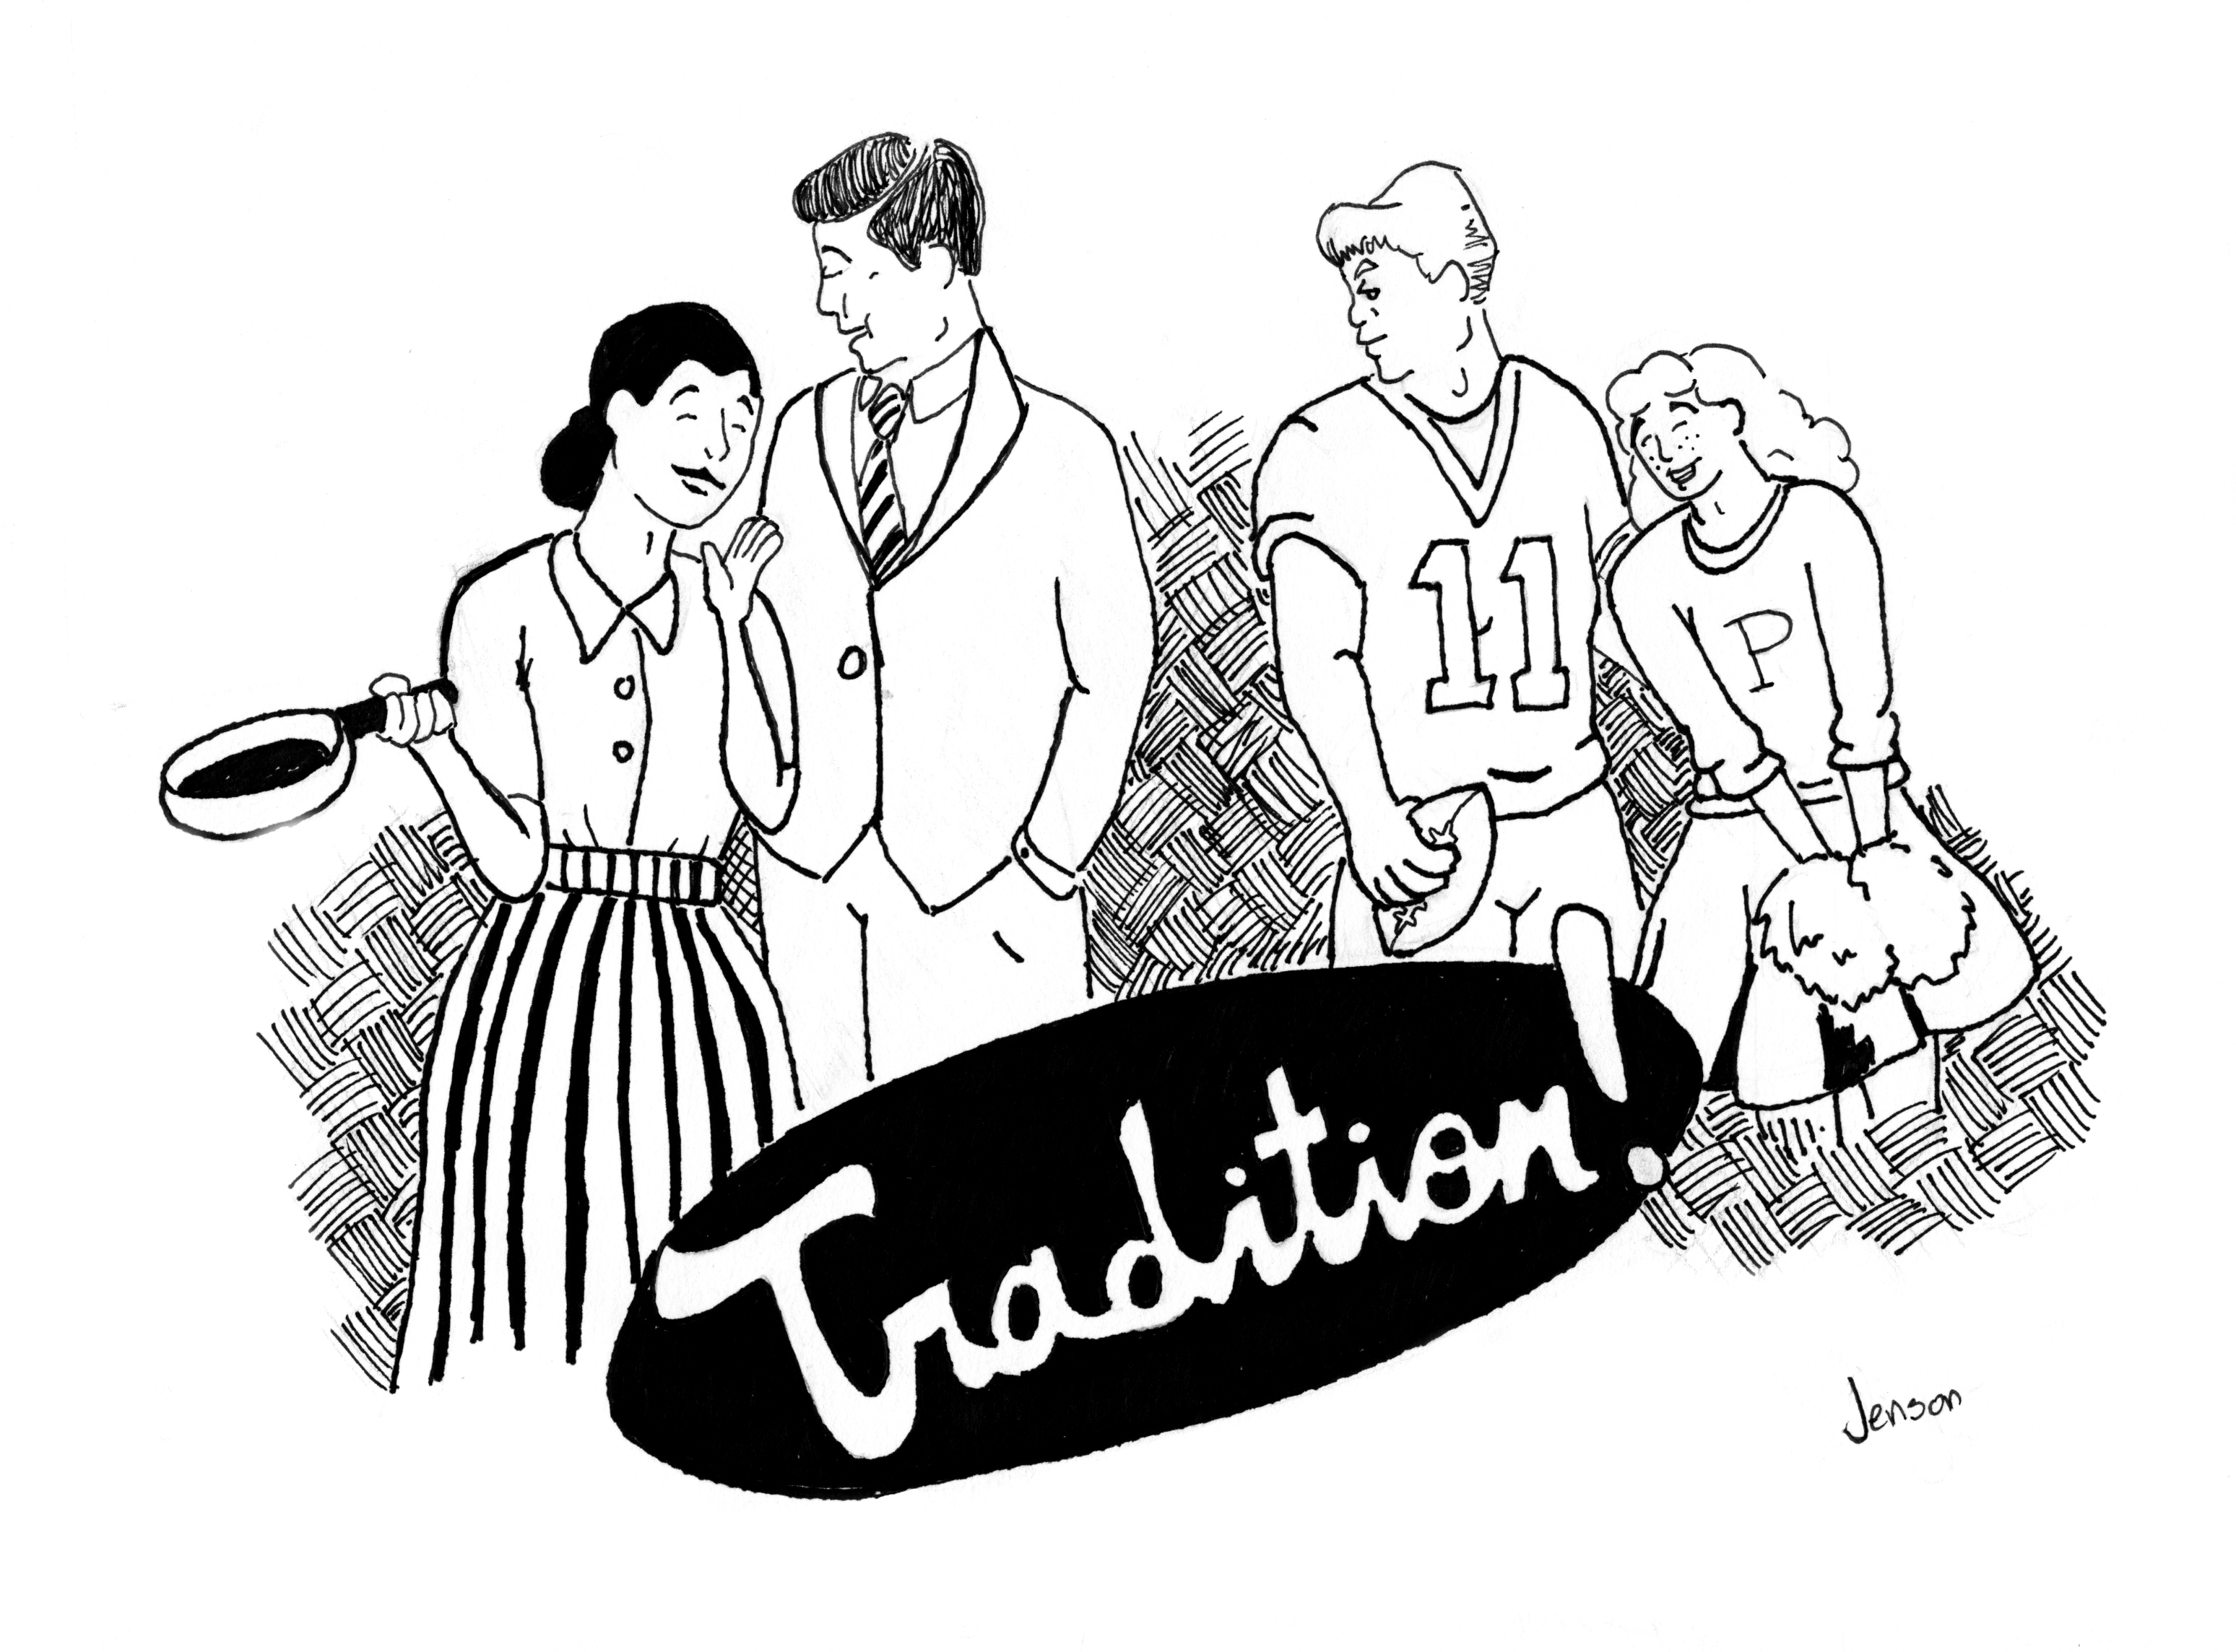 “Tradition: Holding back society since... oh, just about forever.